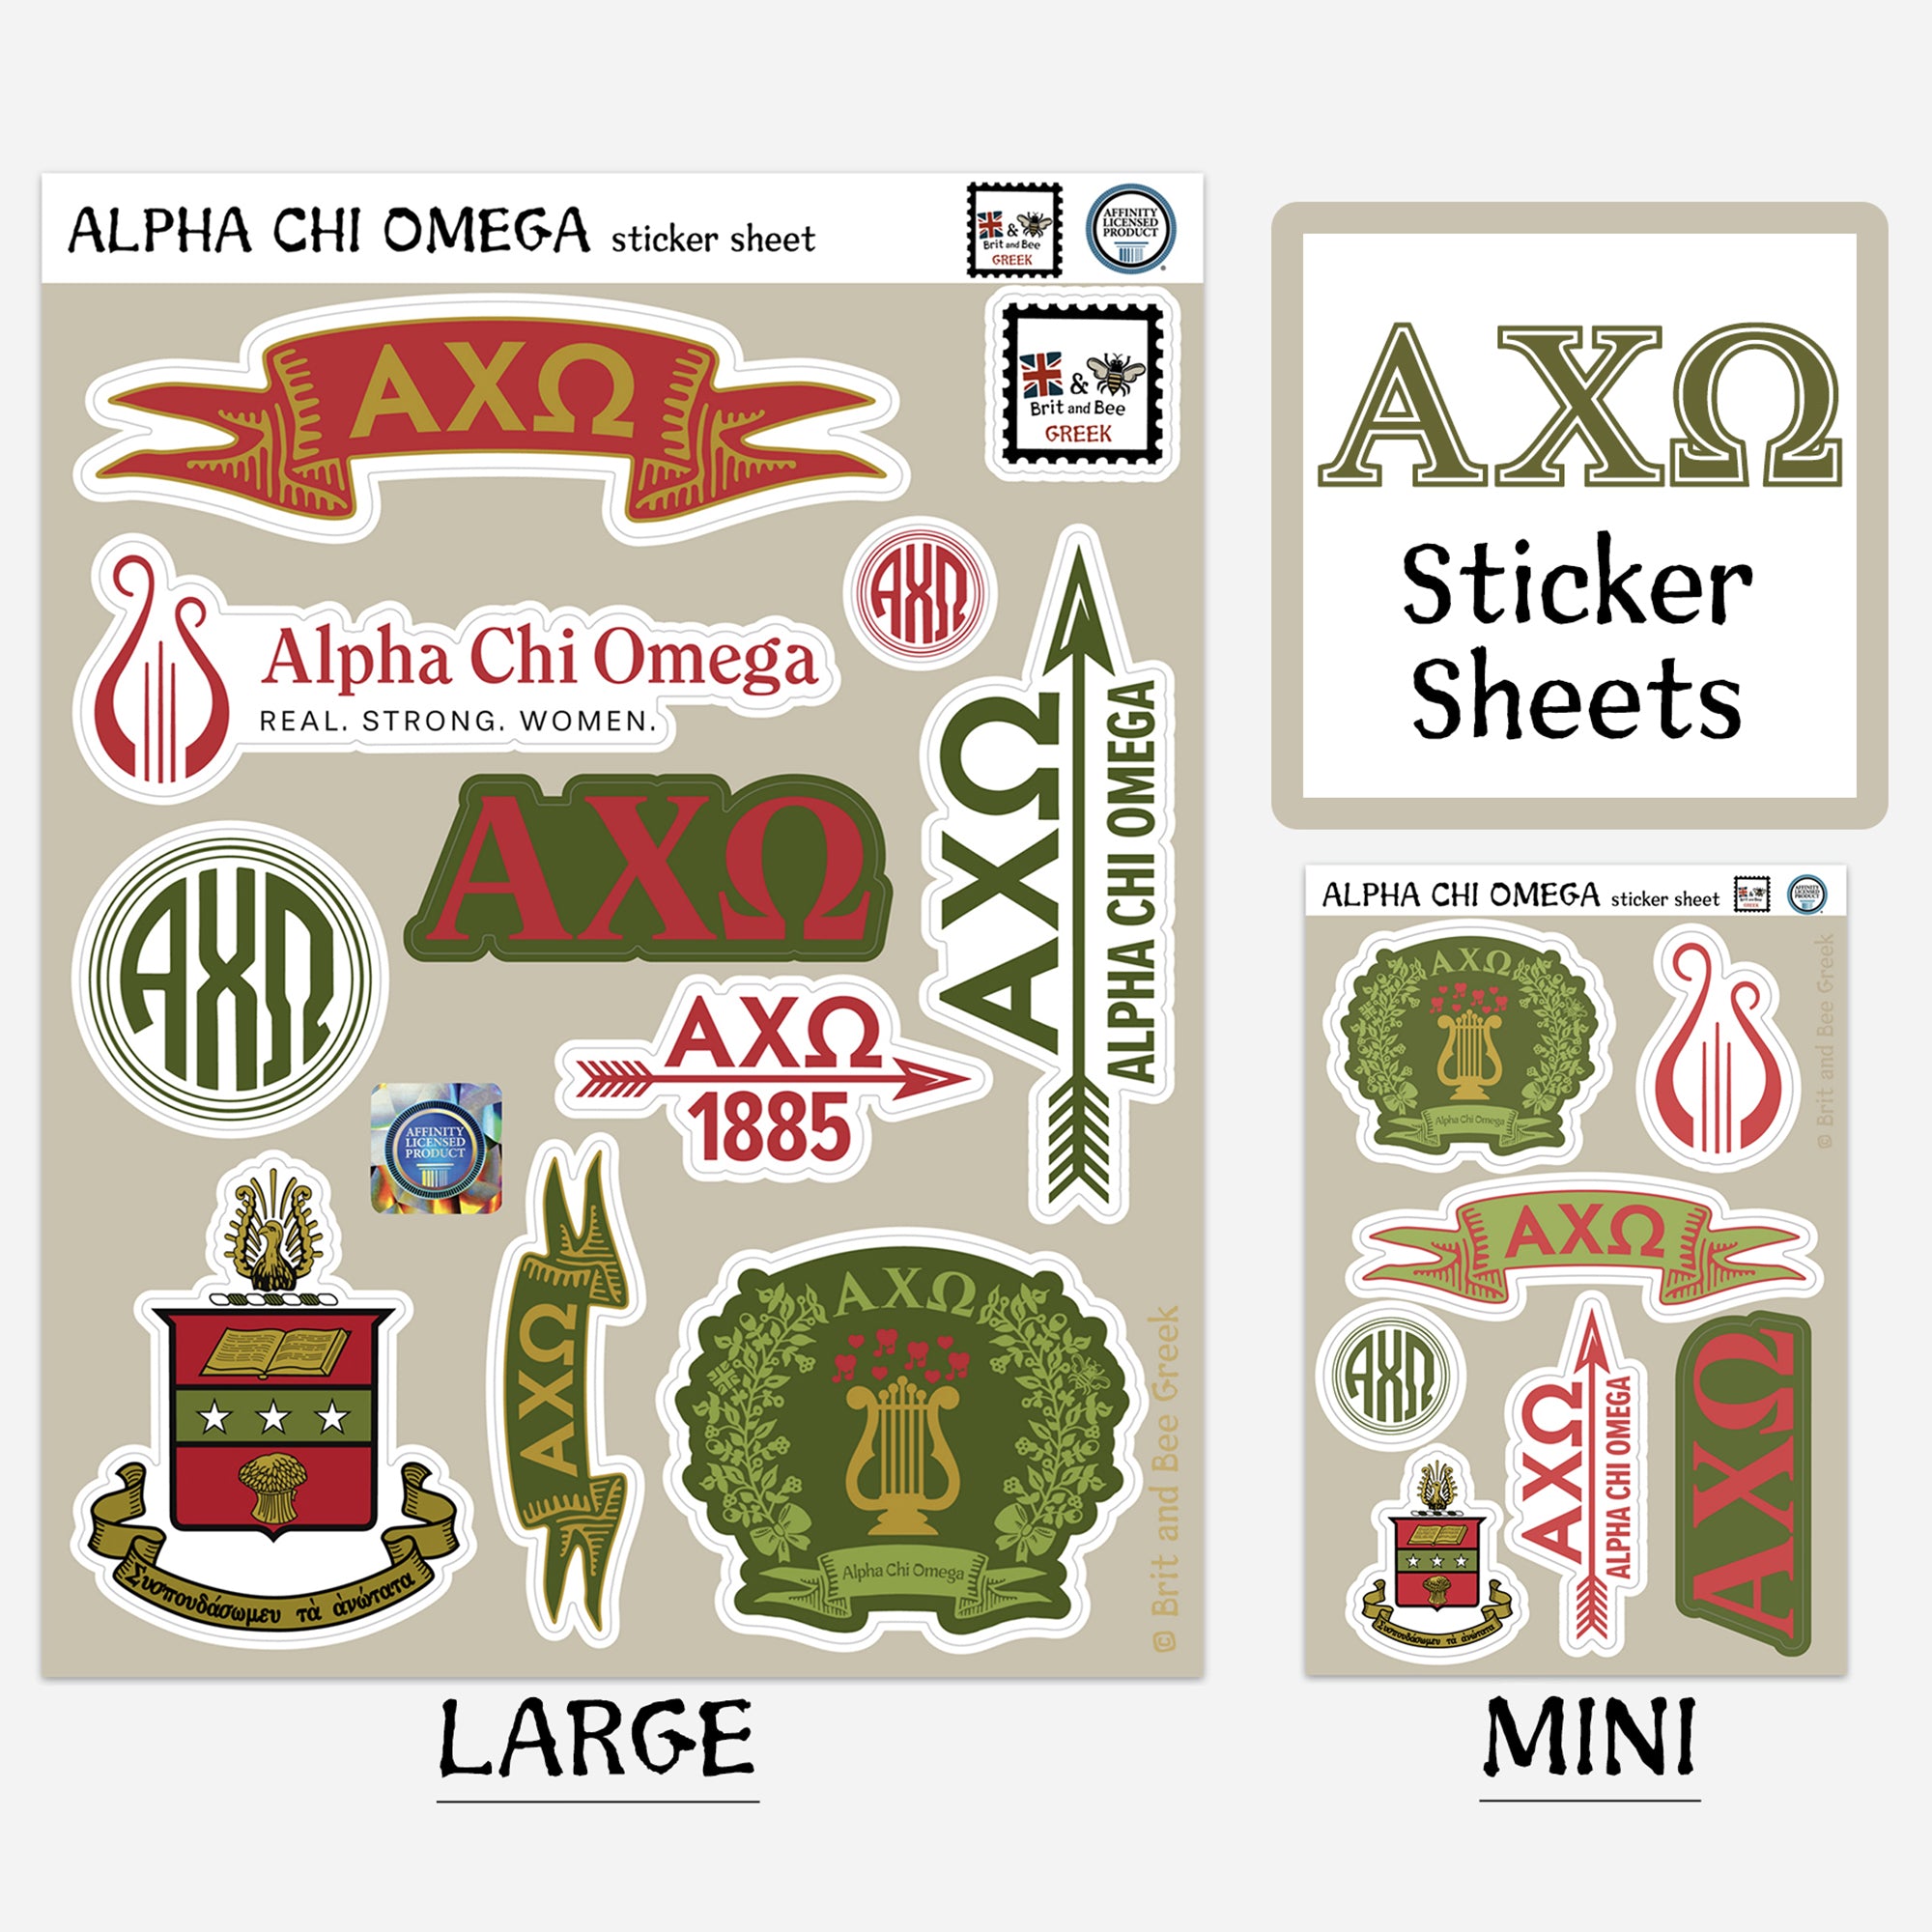 Alpha Chi Omega Sticker Sheet | Brit and Bee